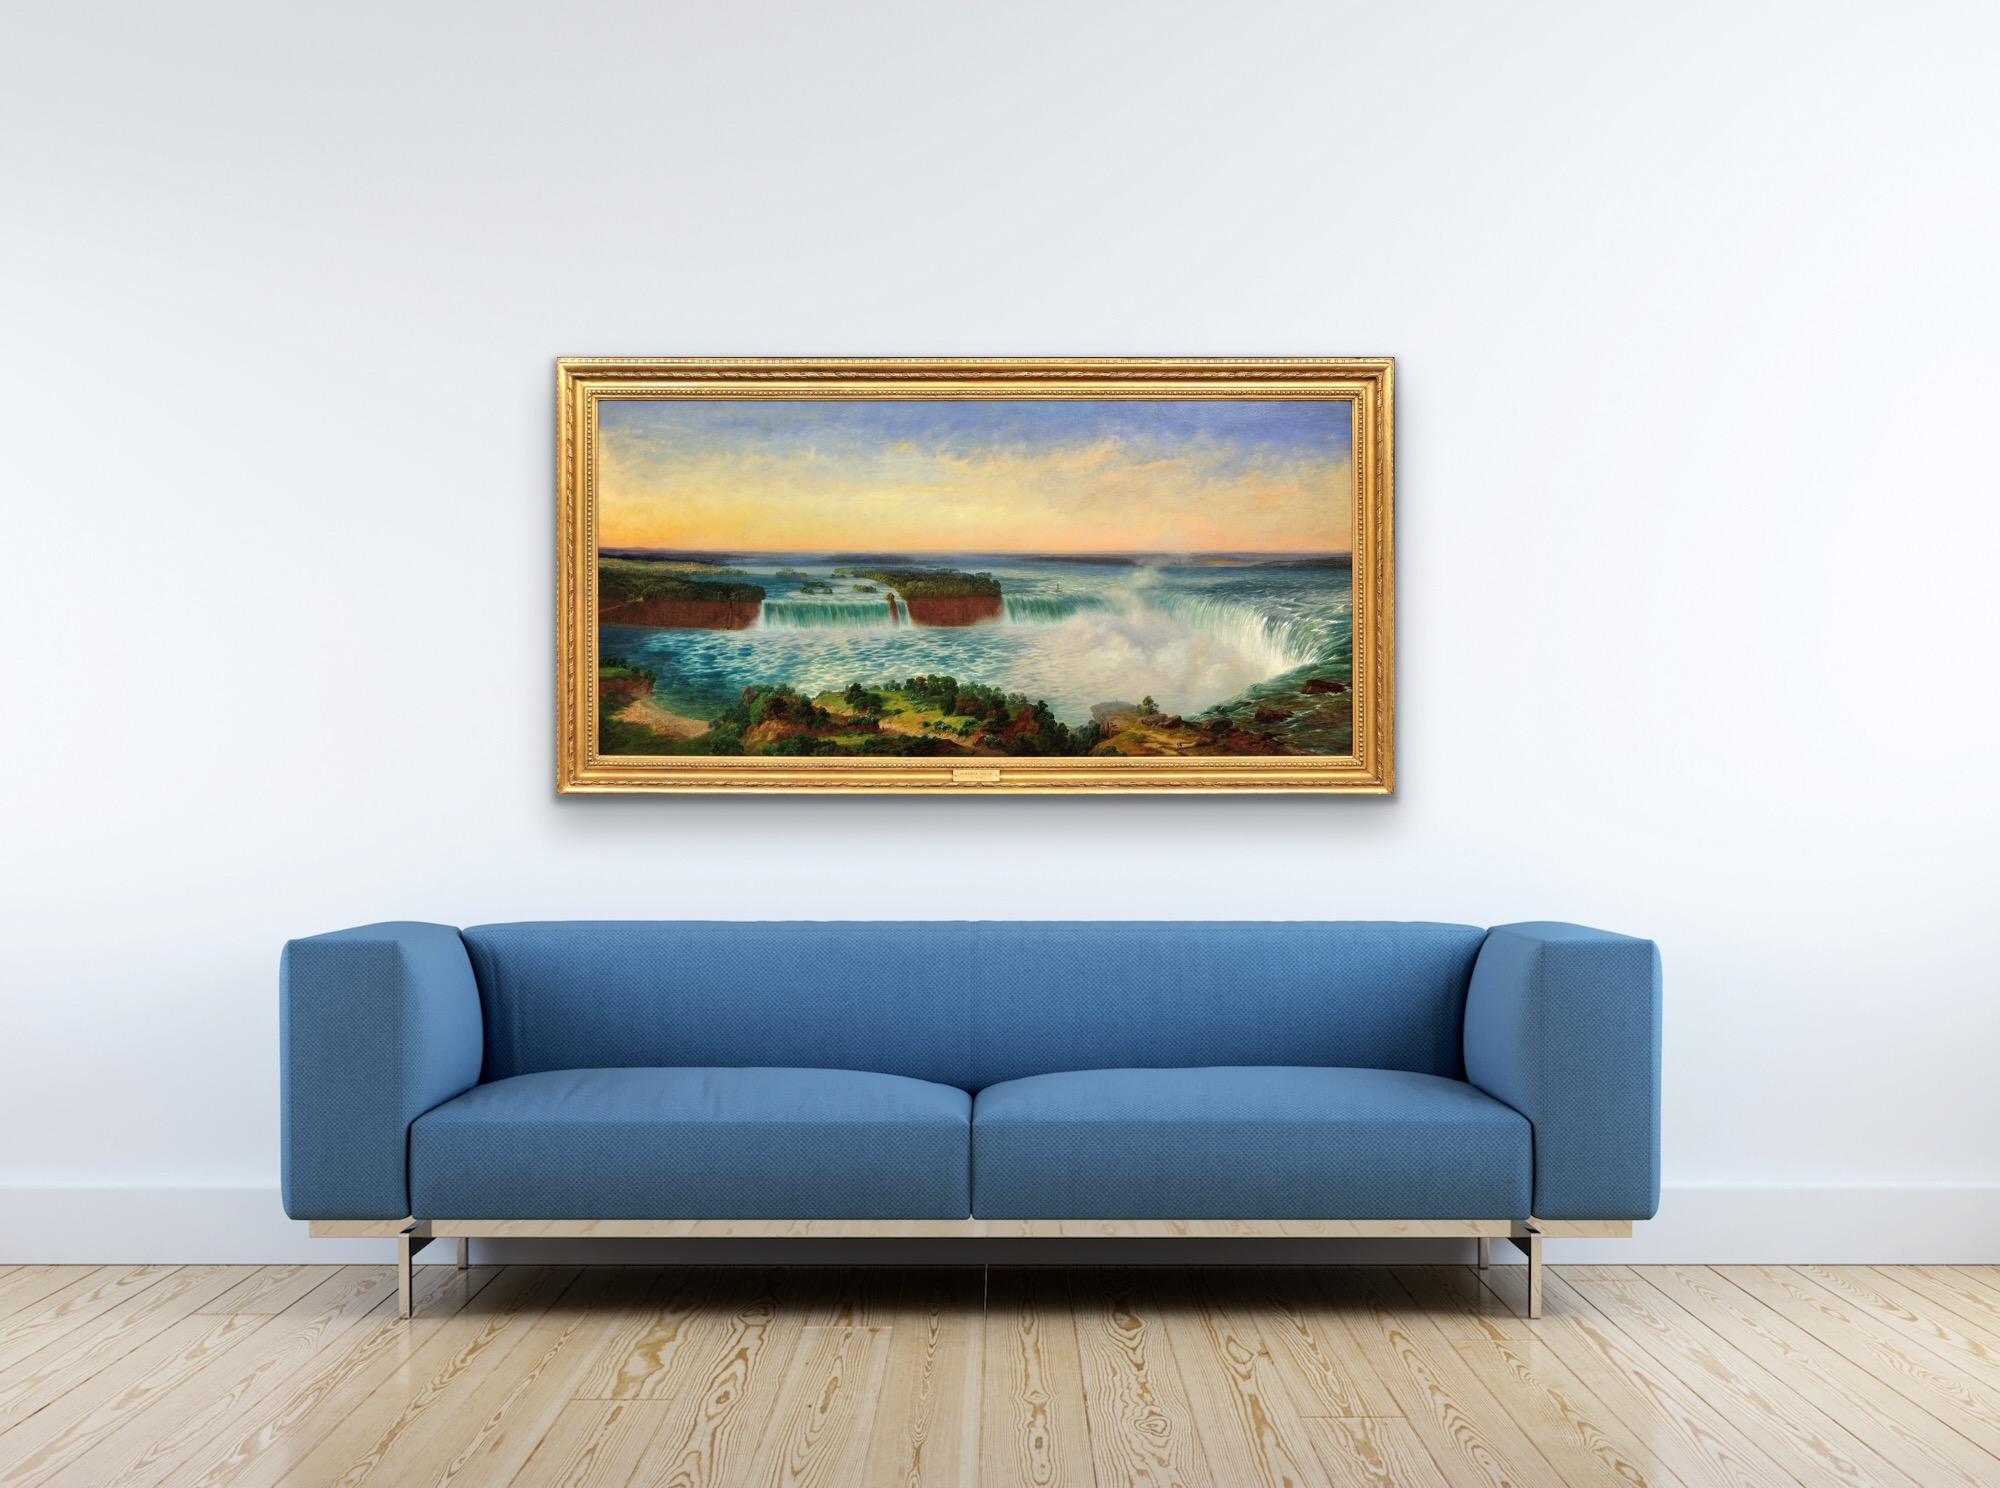 Niagara Falls, Ontario. View Across to New York State. Buffalo NY in Distance.  For Sale 12